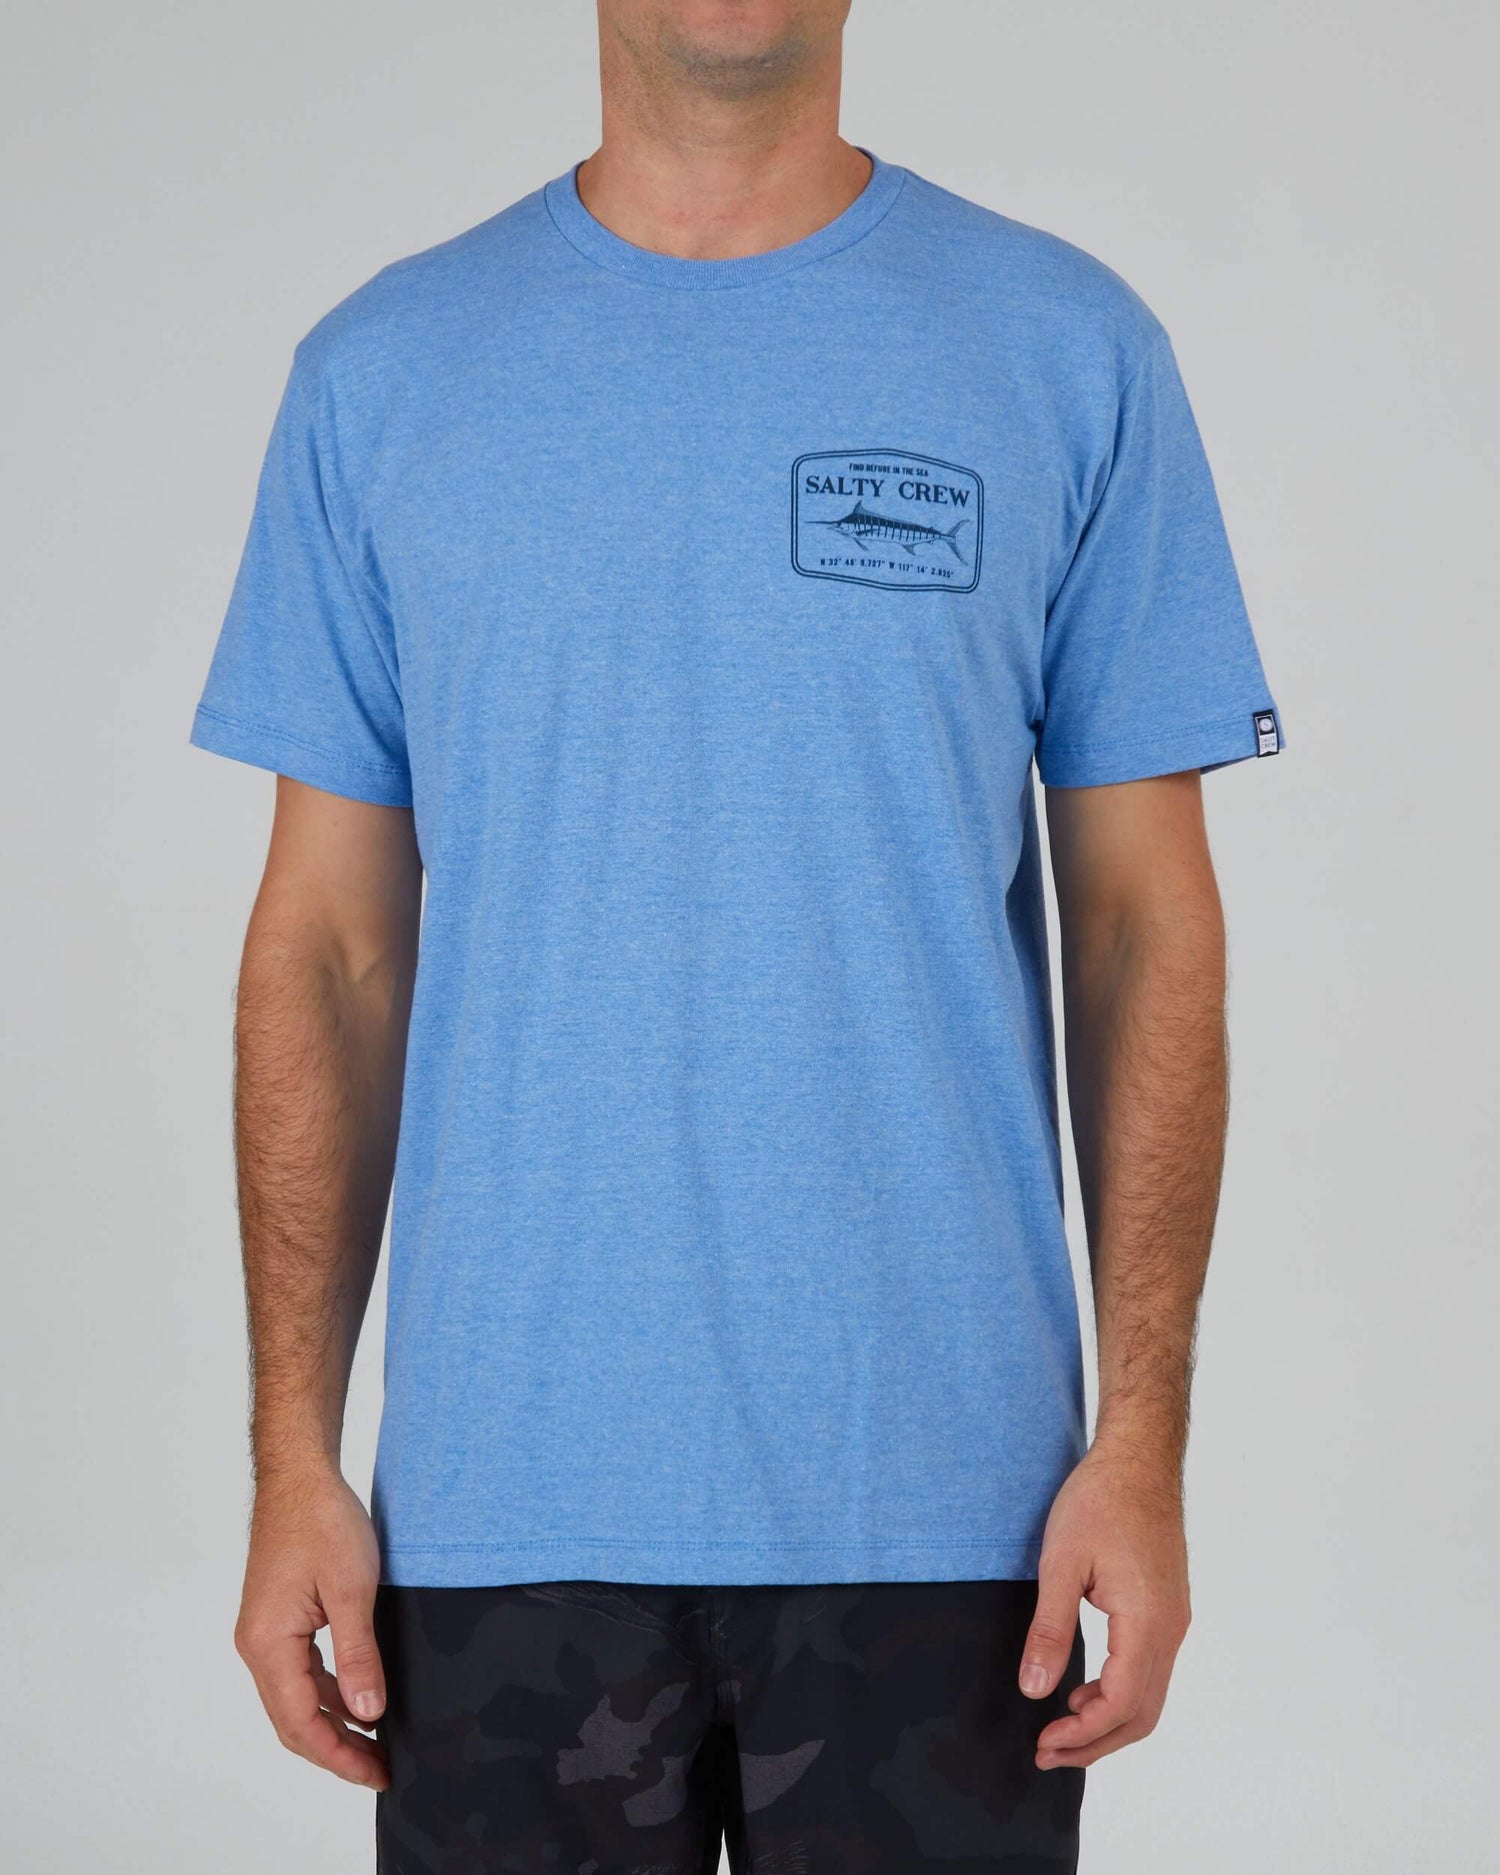 Salty crew T-SHIRTS S/S Stealth S/S Tee - Light Blue Heather in LIGHT BLUE Heather